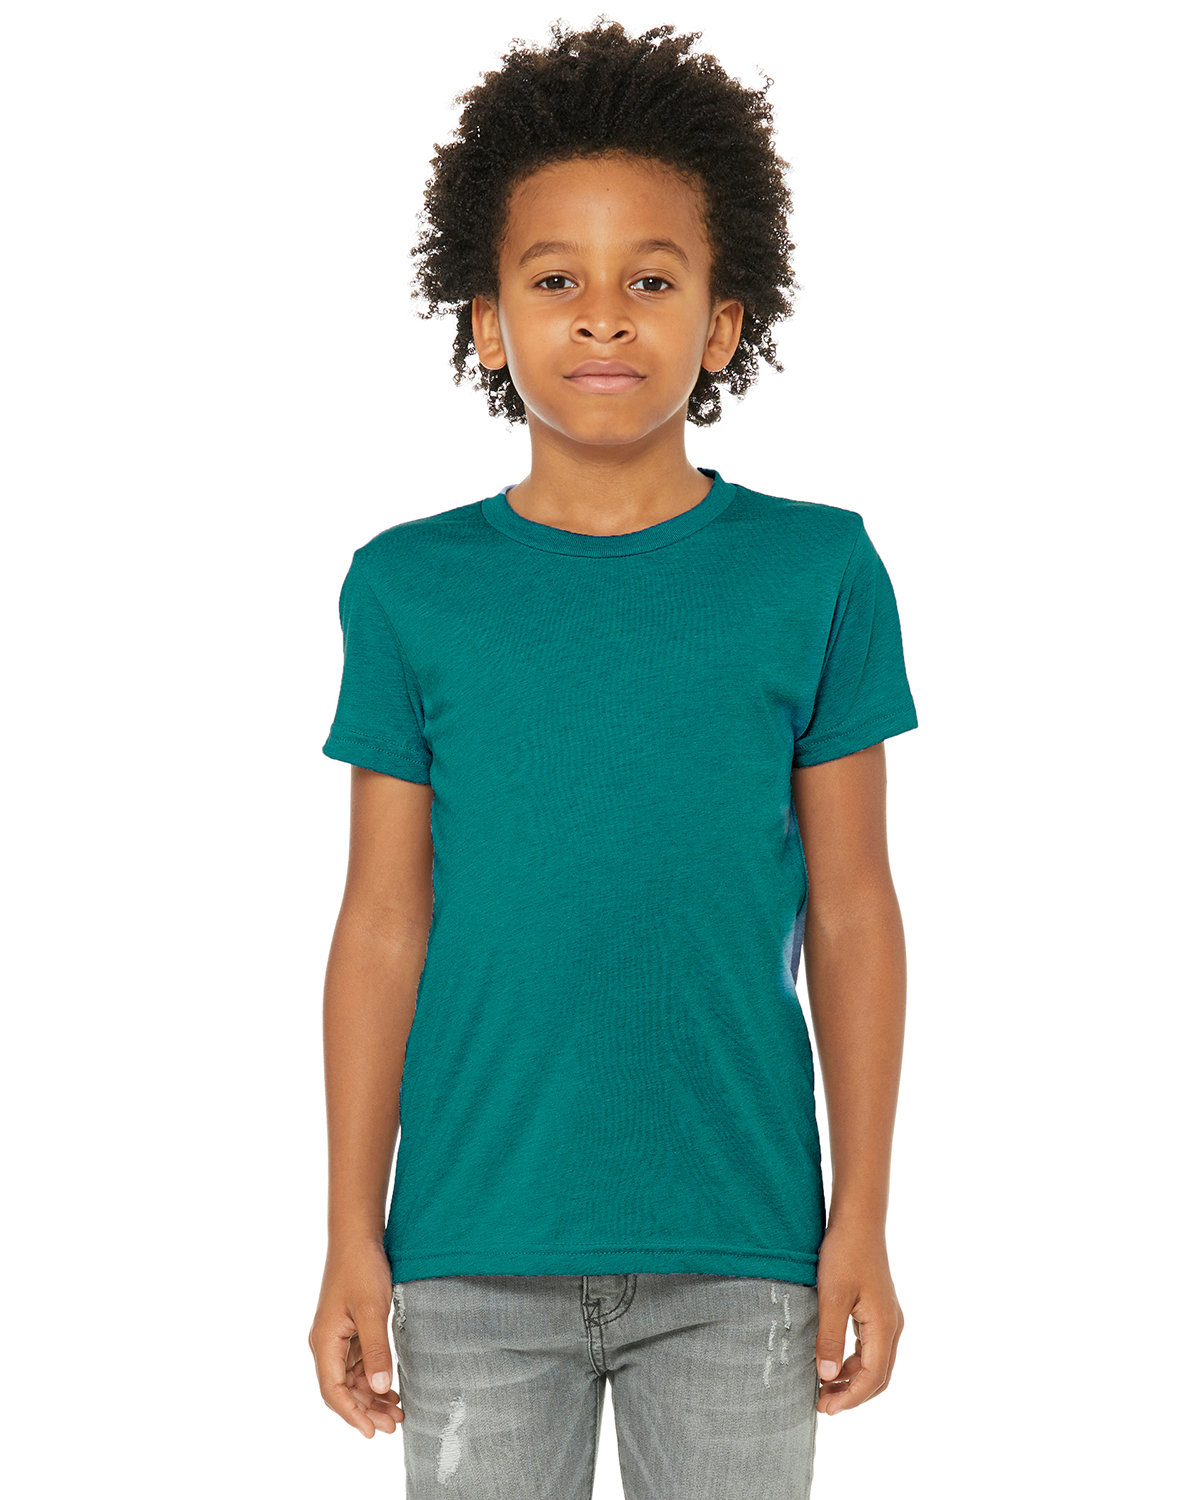 Bella + Canvas Youth Triblend Short-Sleeve T-Shirt TEAL TRIBLEND 